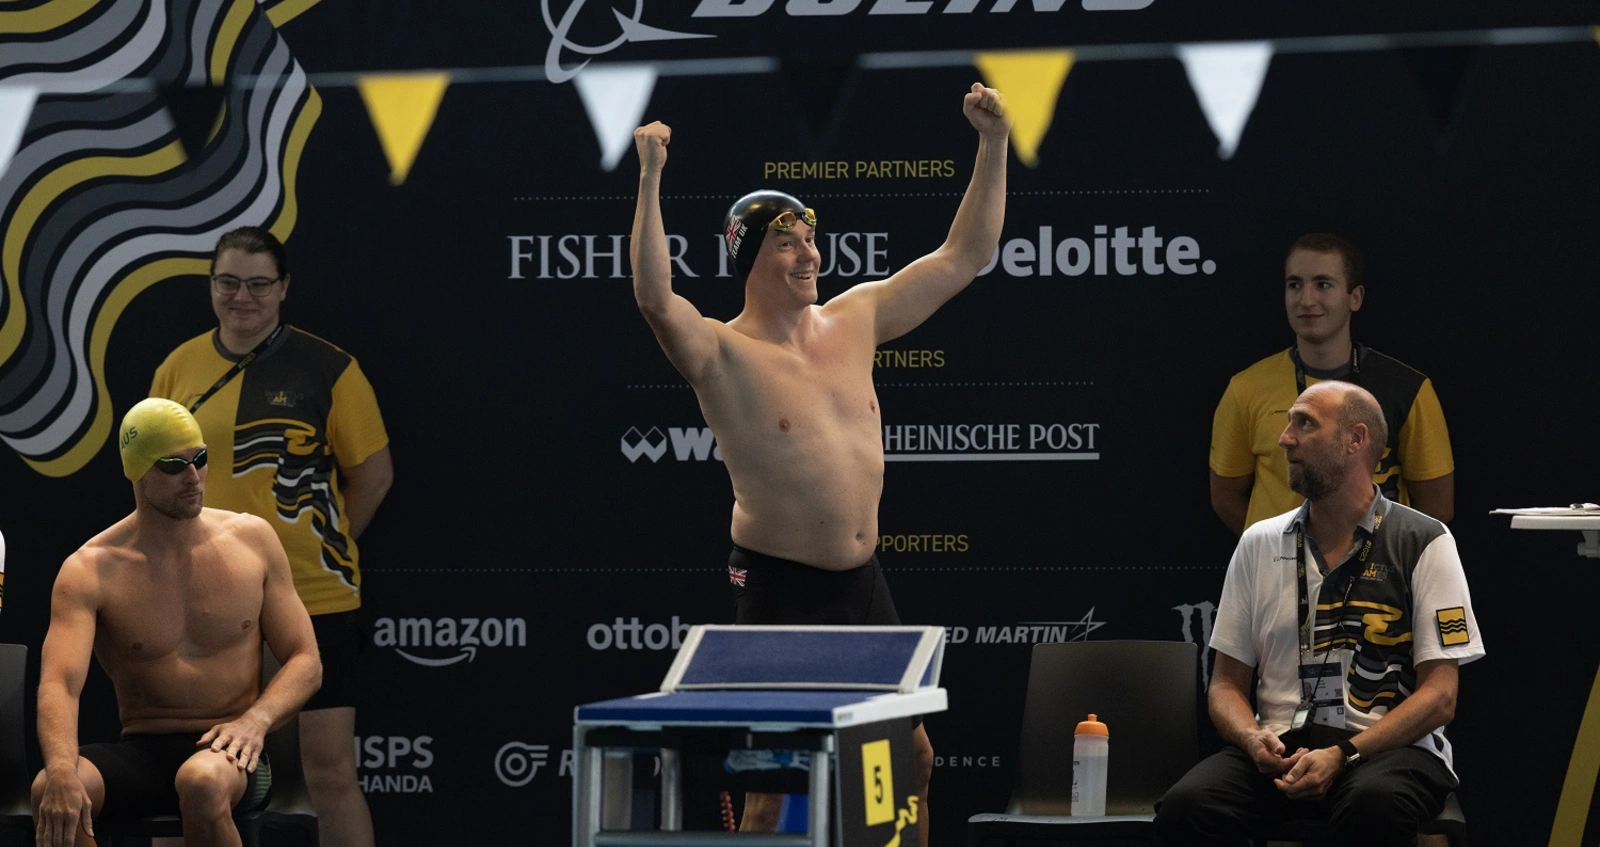 Charlie Charles raising his hands to the crowd at the Invictus Games before a swimming heat